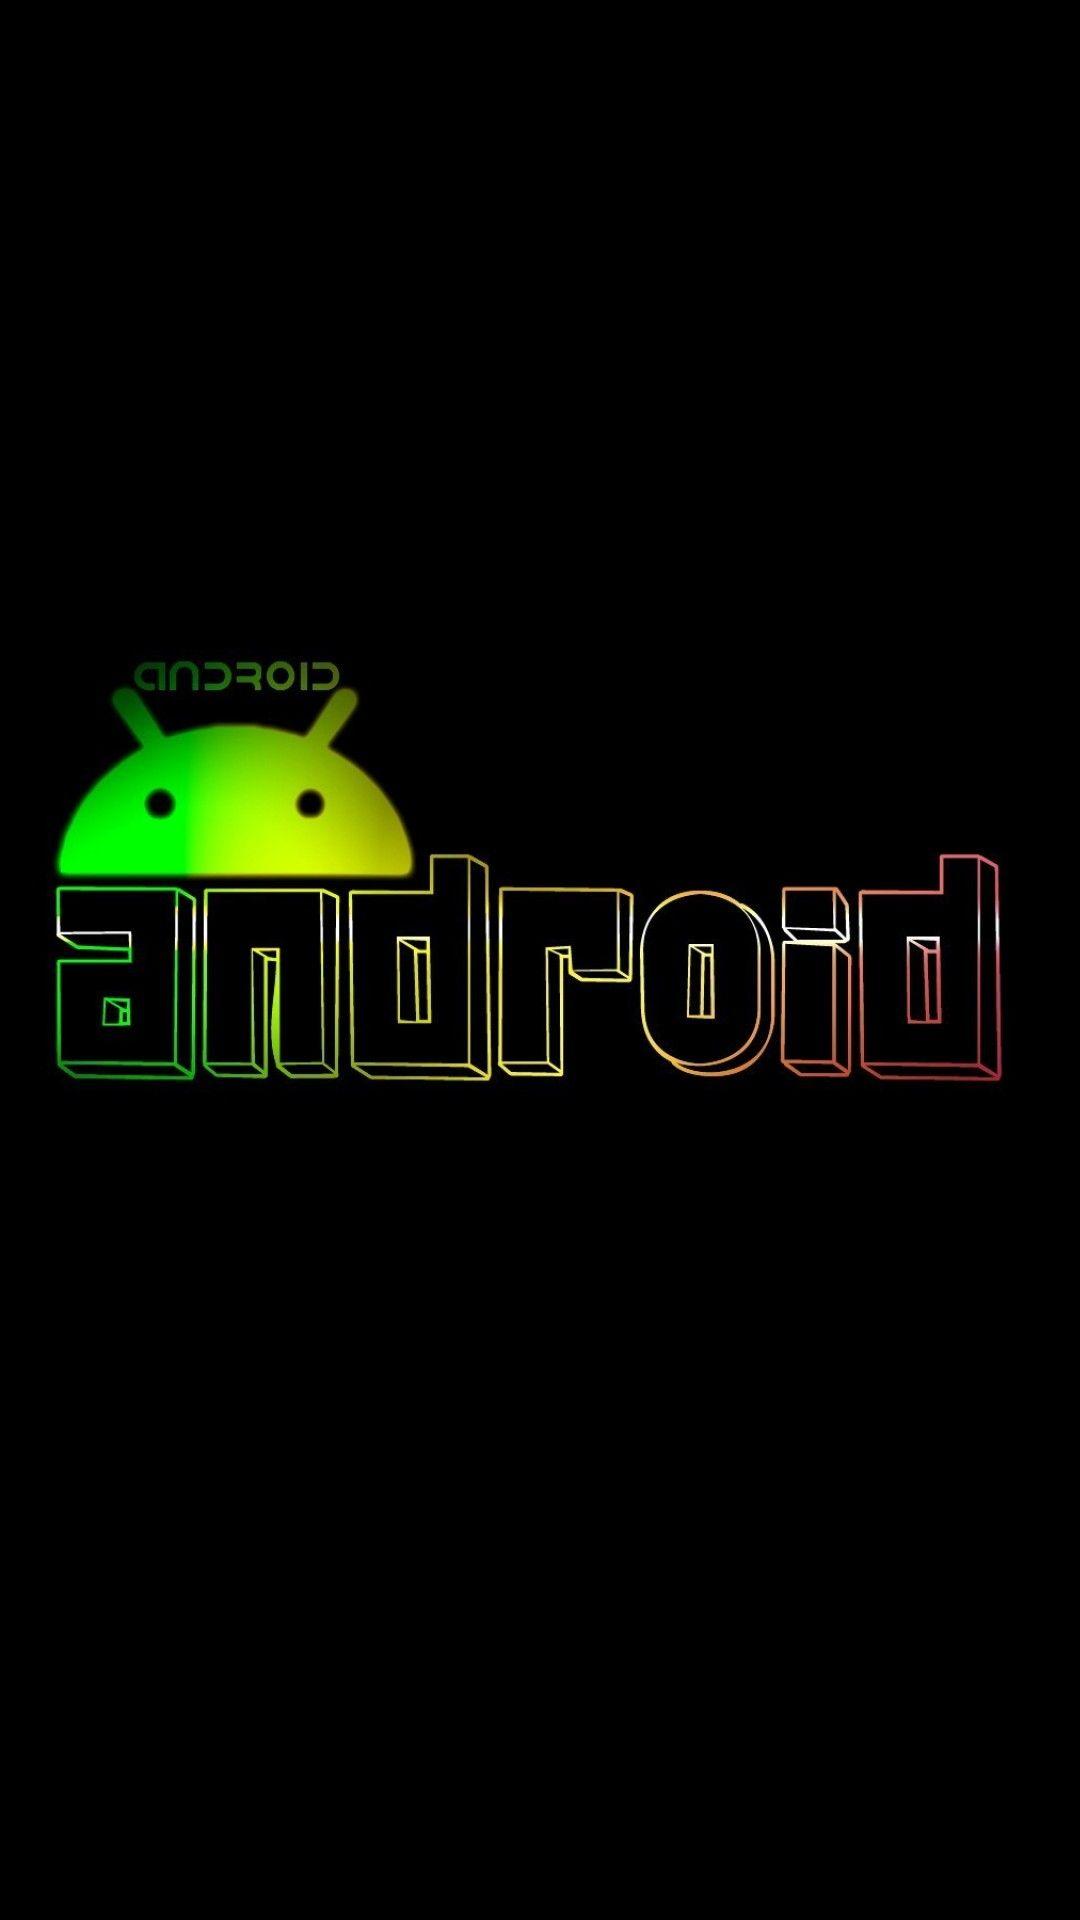 Android Logo Wallpaper HD for Mobile and Tablets